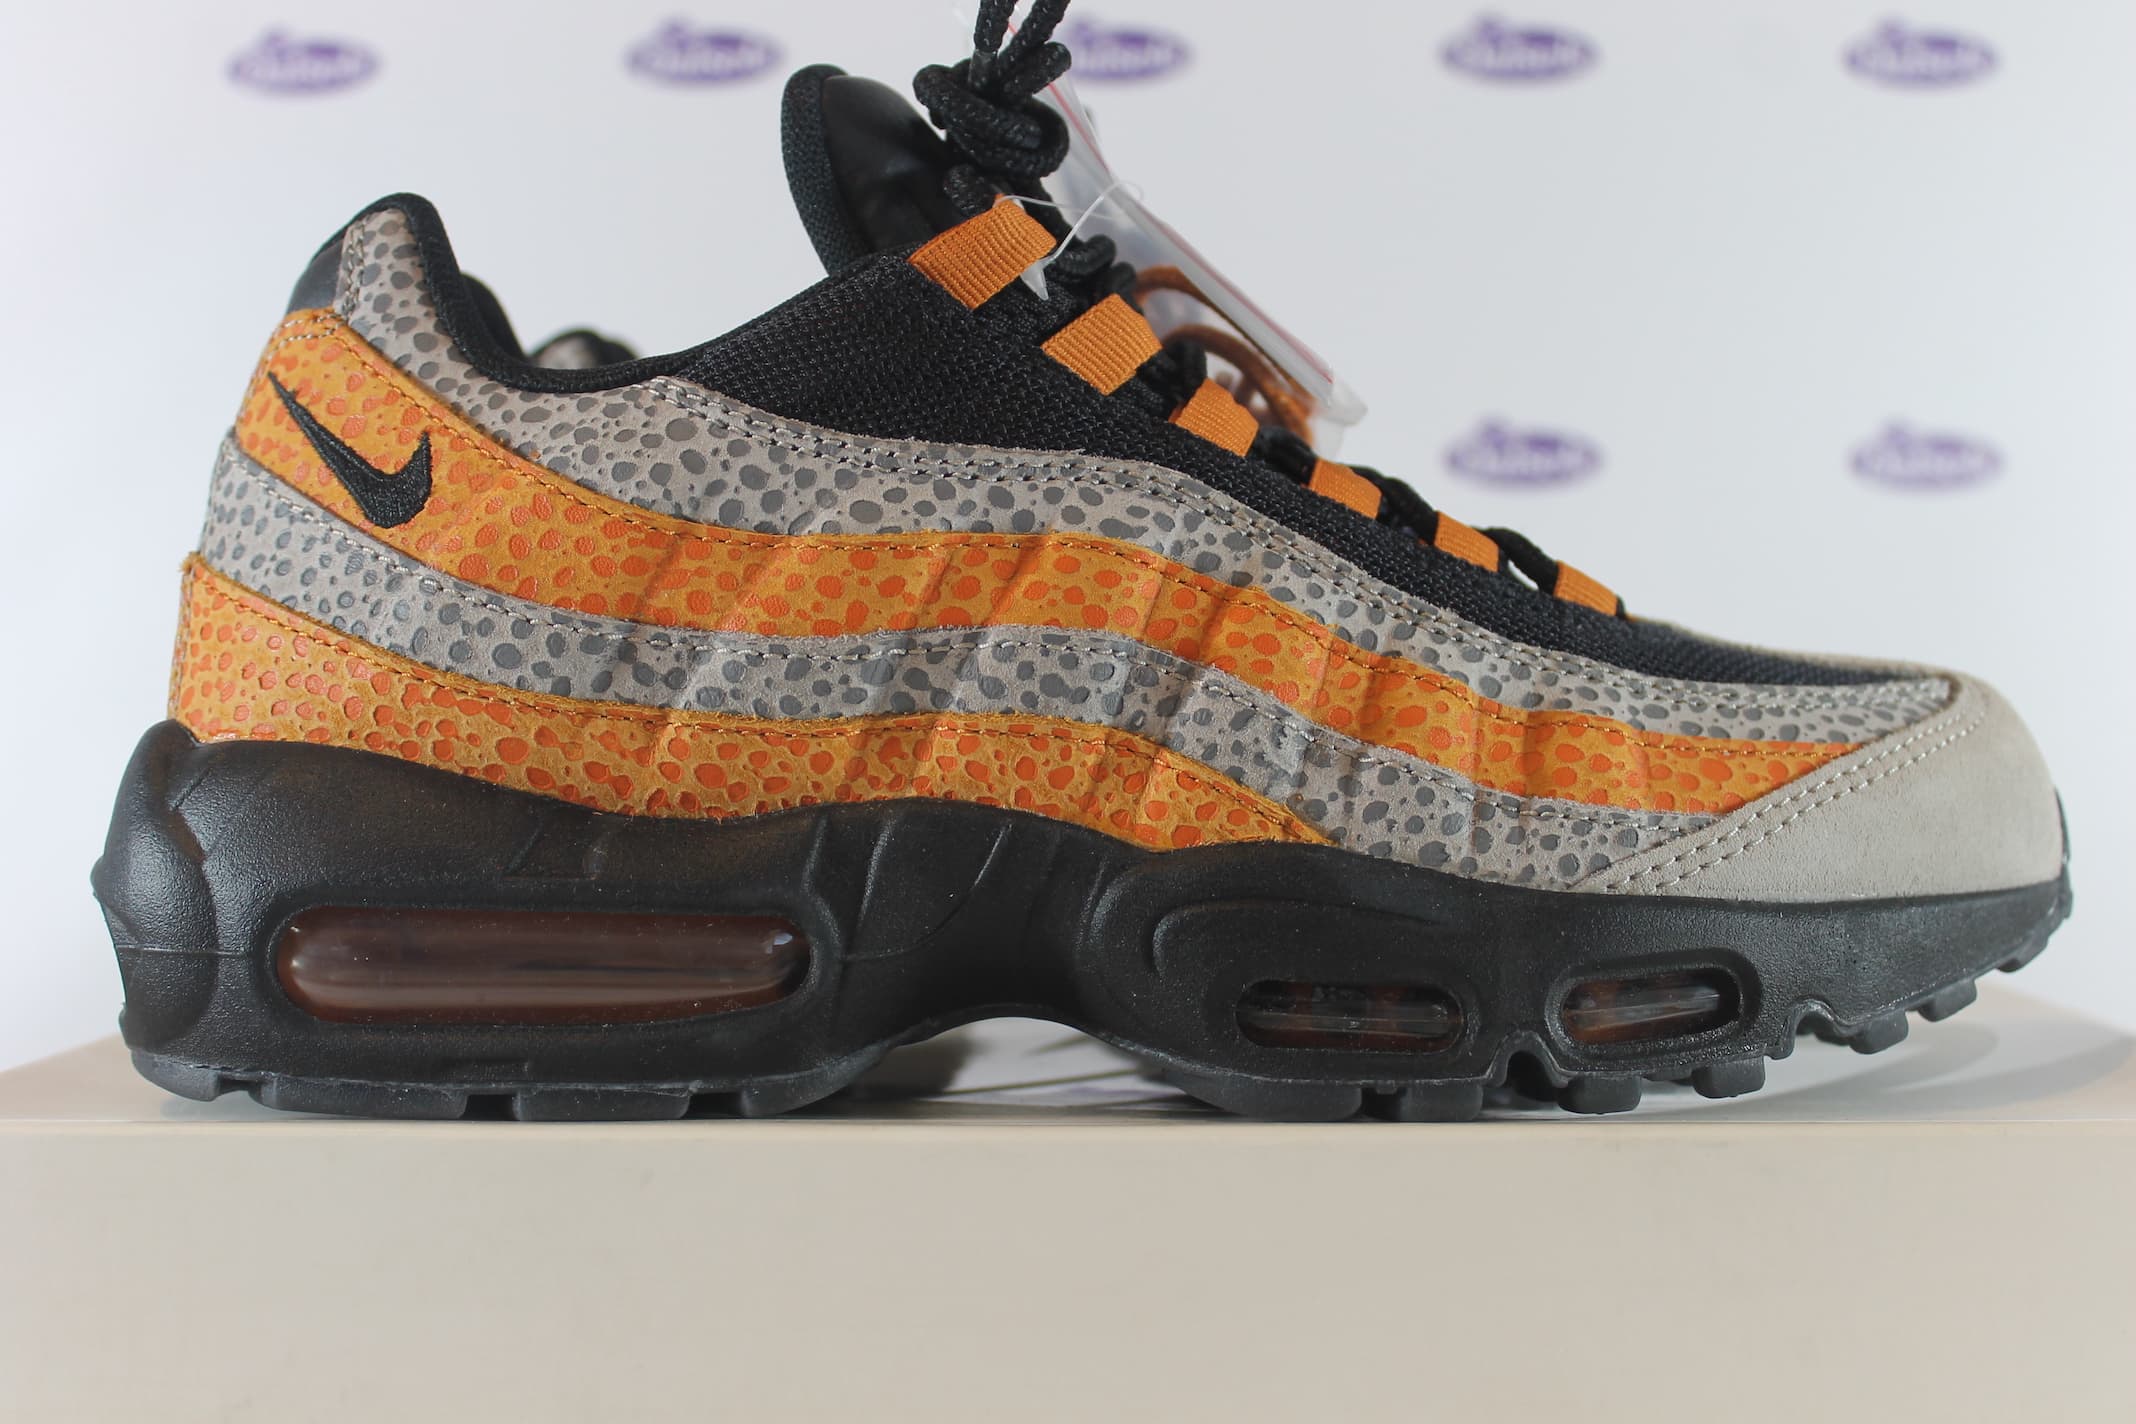 lavabo aceptable De Dios Nike Air Max 95 Size? x What The Safari • ✓ In stock at Outsole